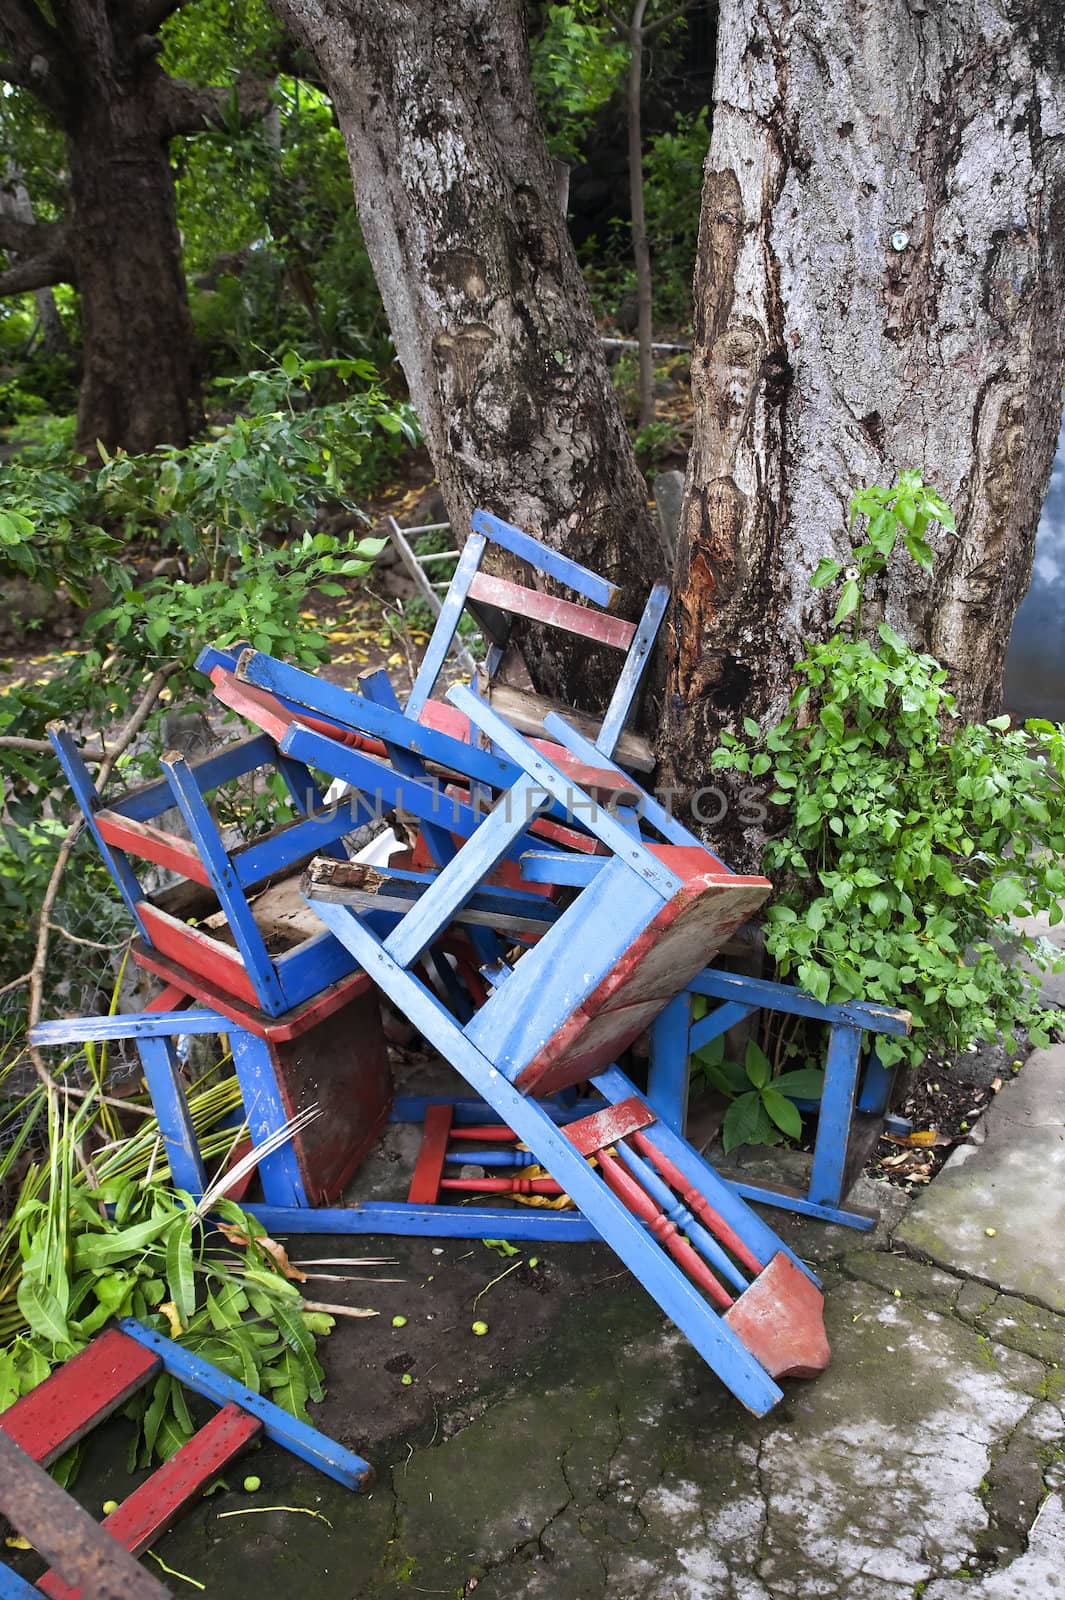 Colorful discarded chairs near a tree in Nicaragua